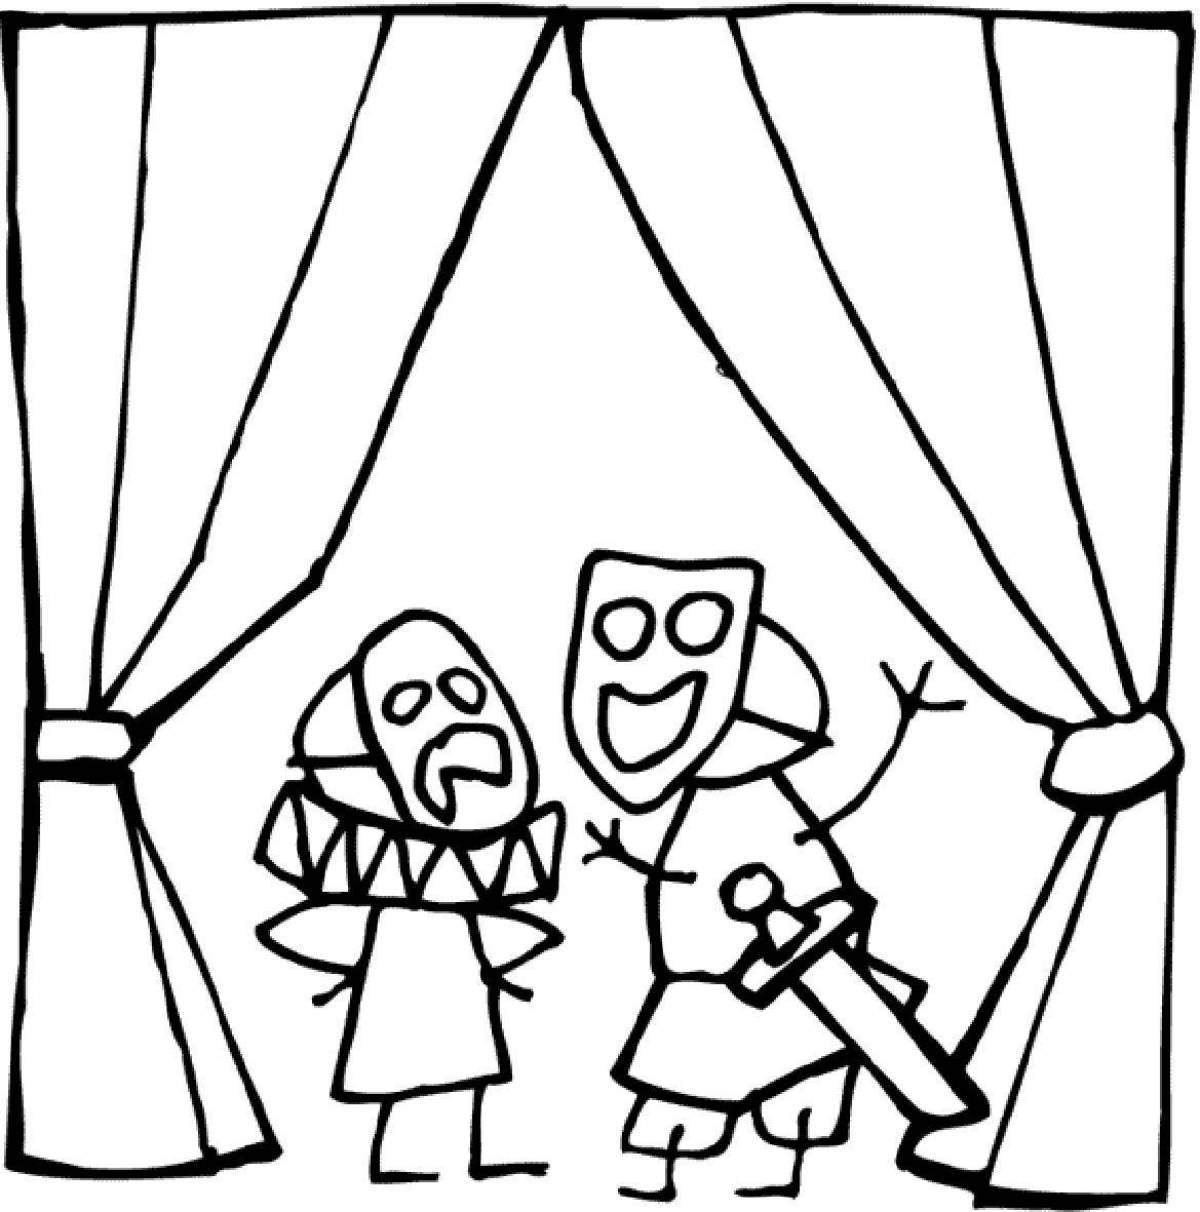 Fantastic theater coloring page